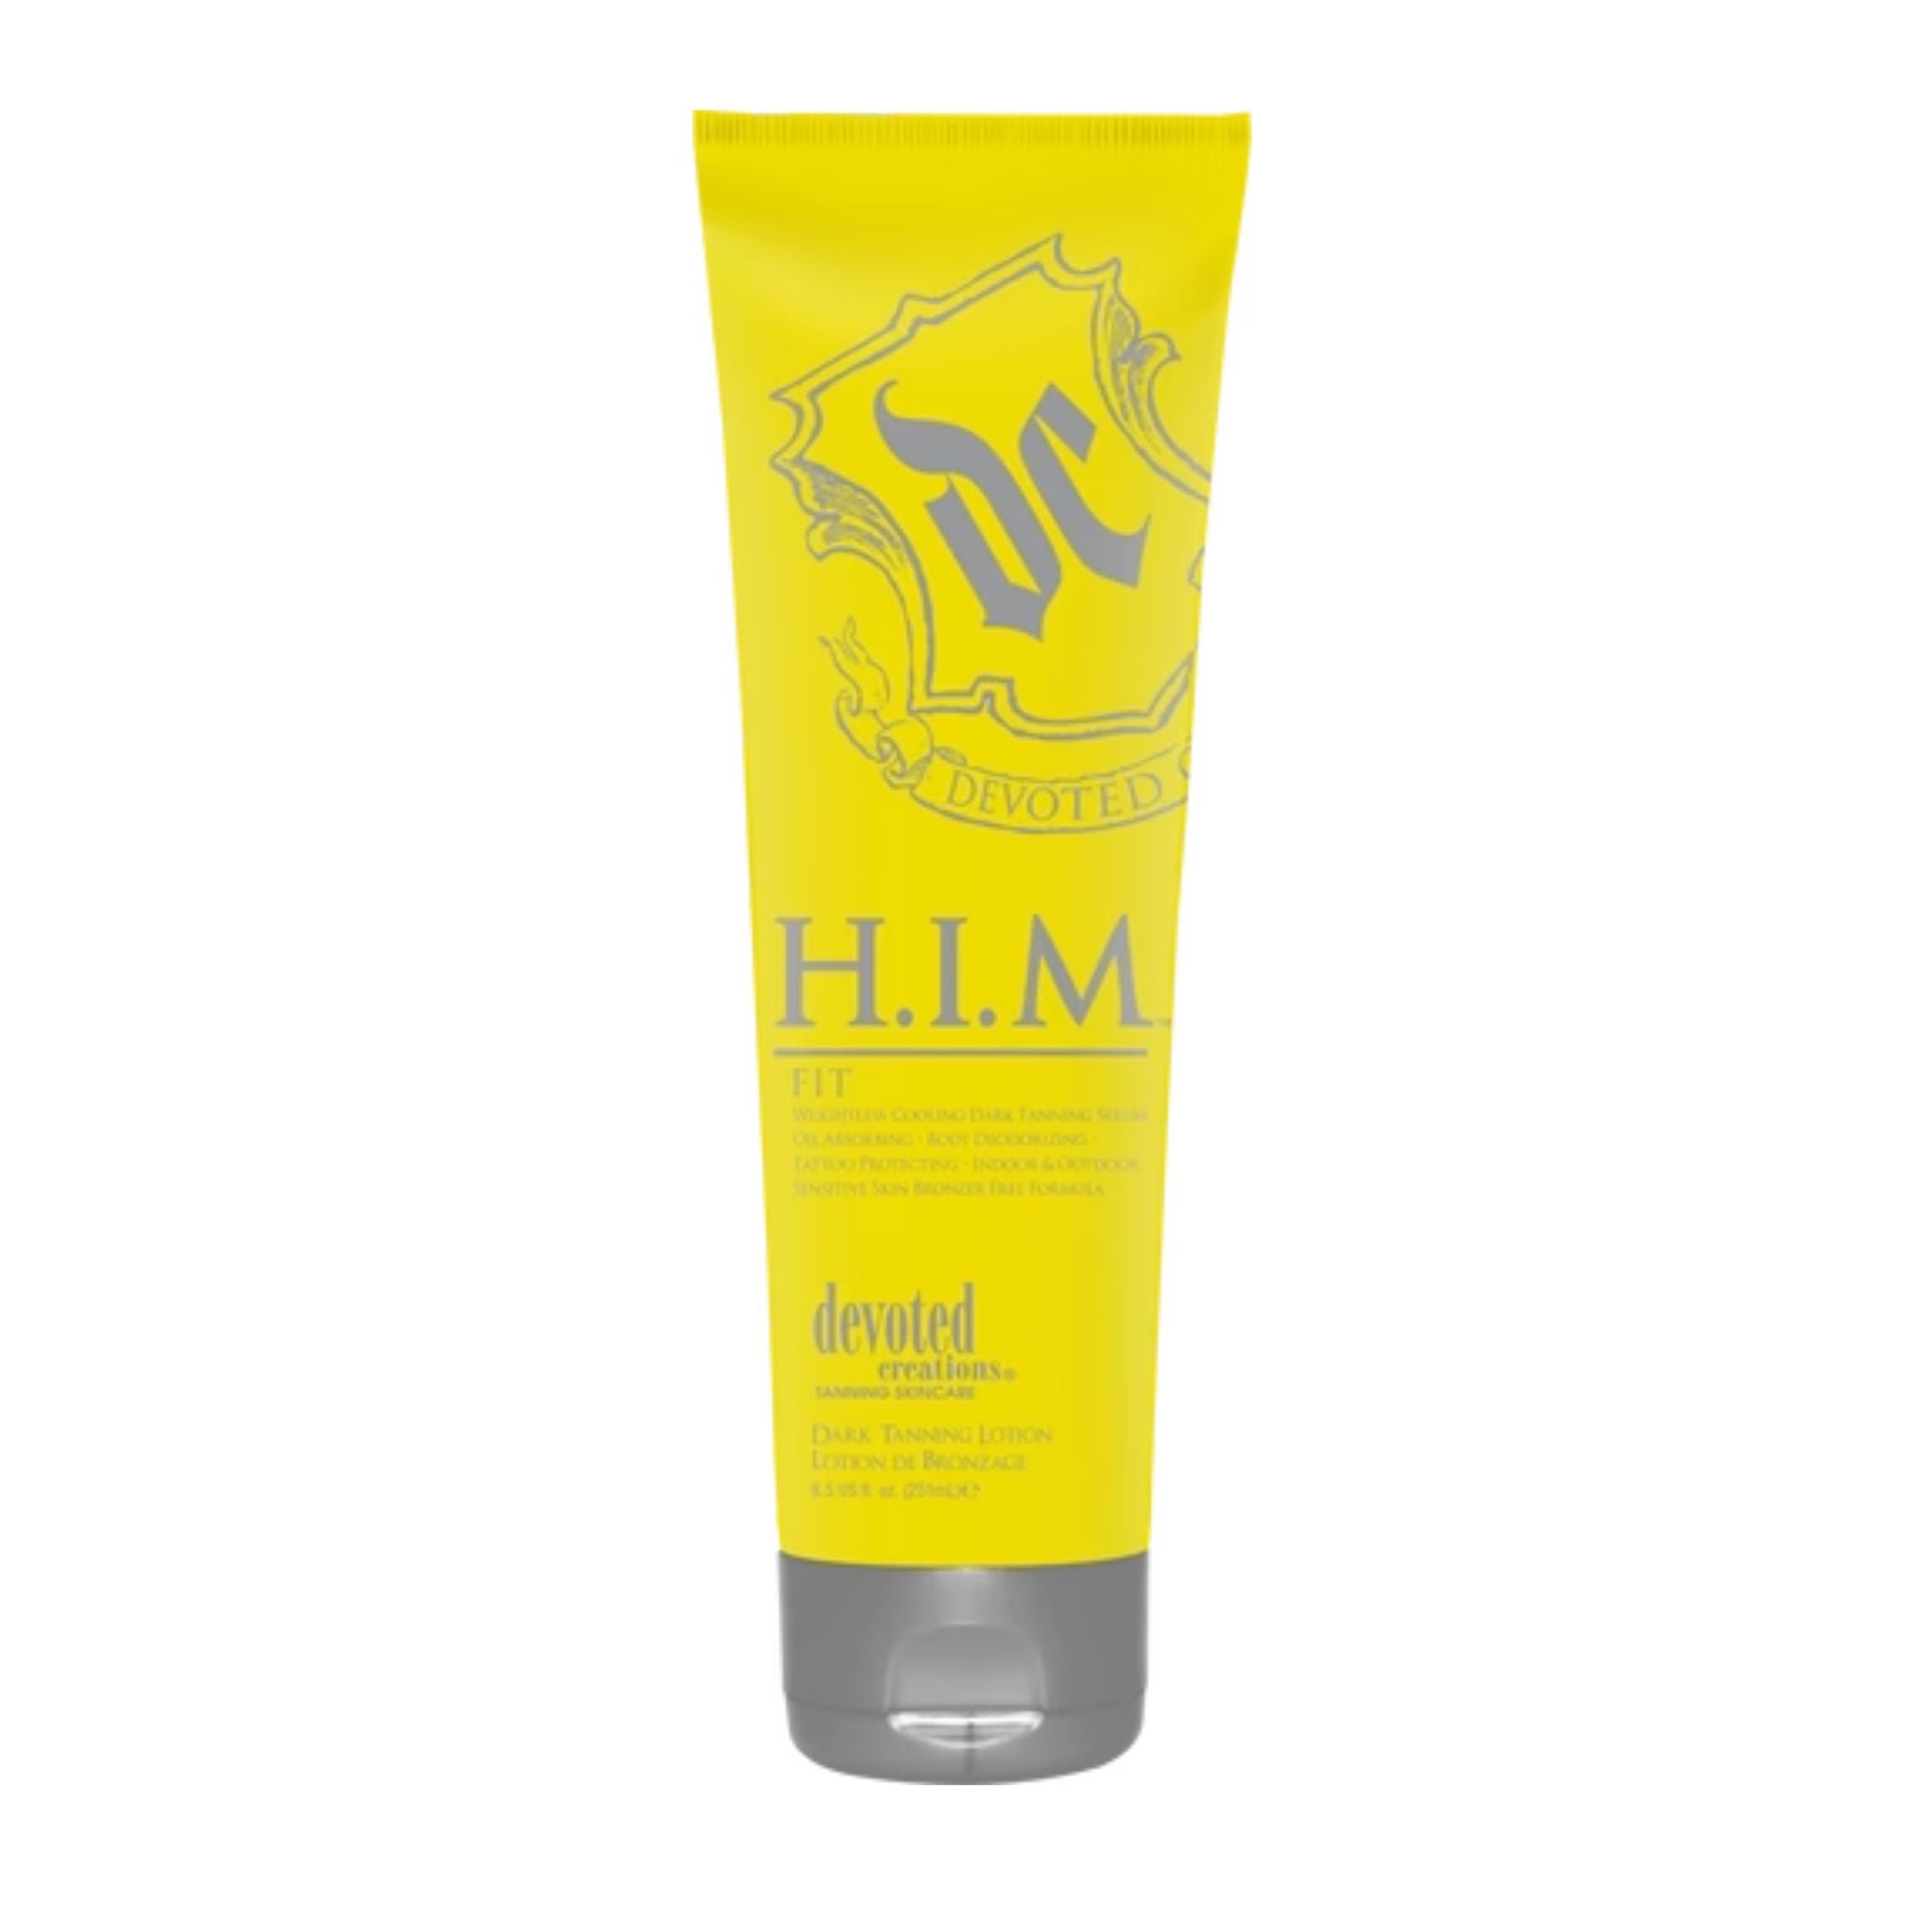 Devoted Creations H.I.M. FIT Tanning Lotion